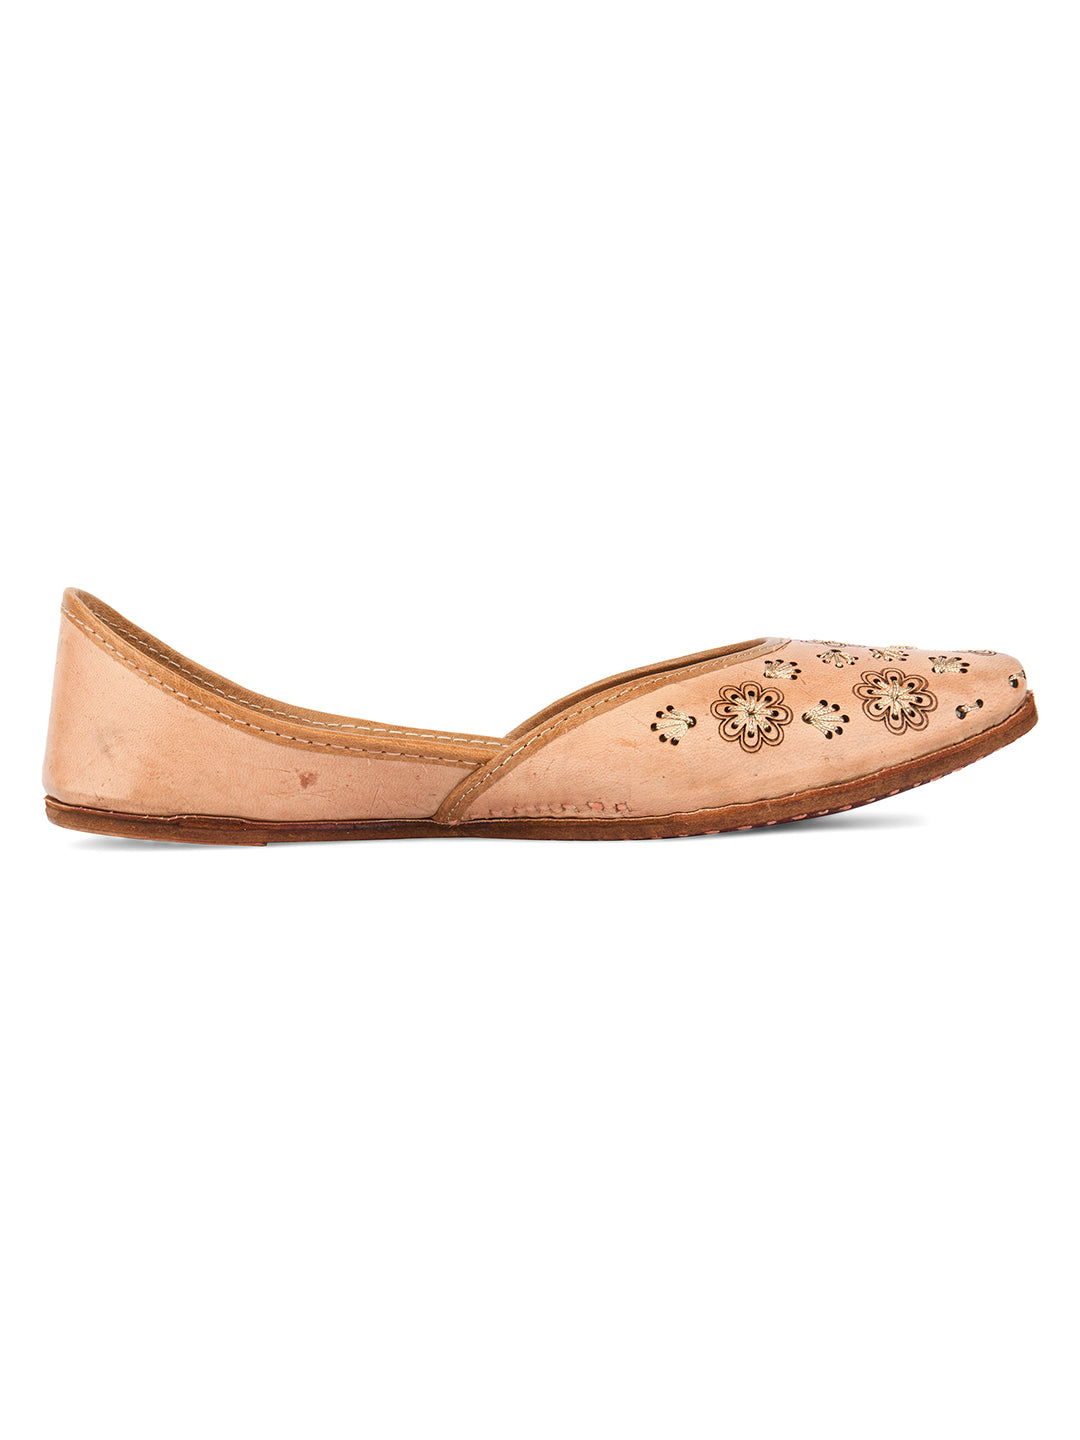 DESI COLOUR Women Nude-Coloured Textured Leather Ethnic Mojaris with Laser Cuts Flats